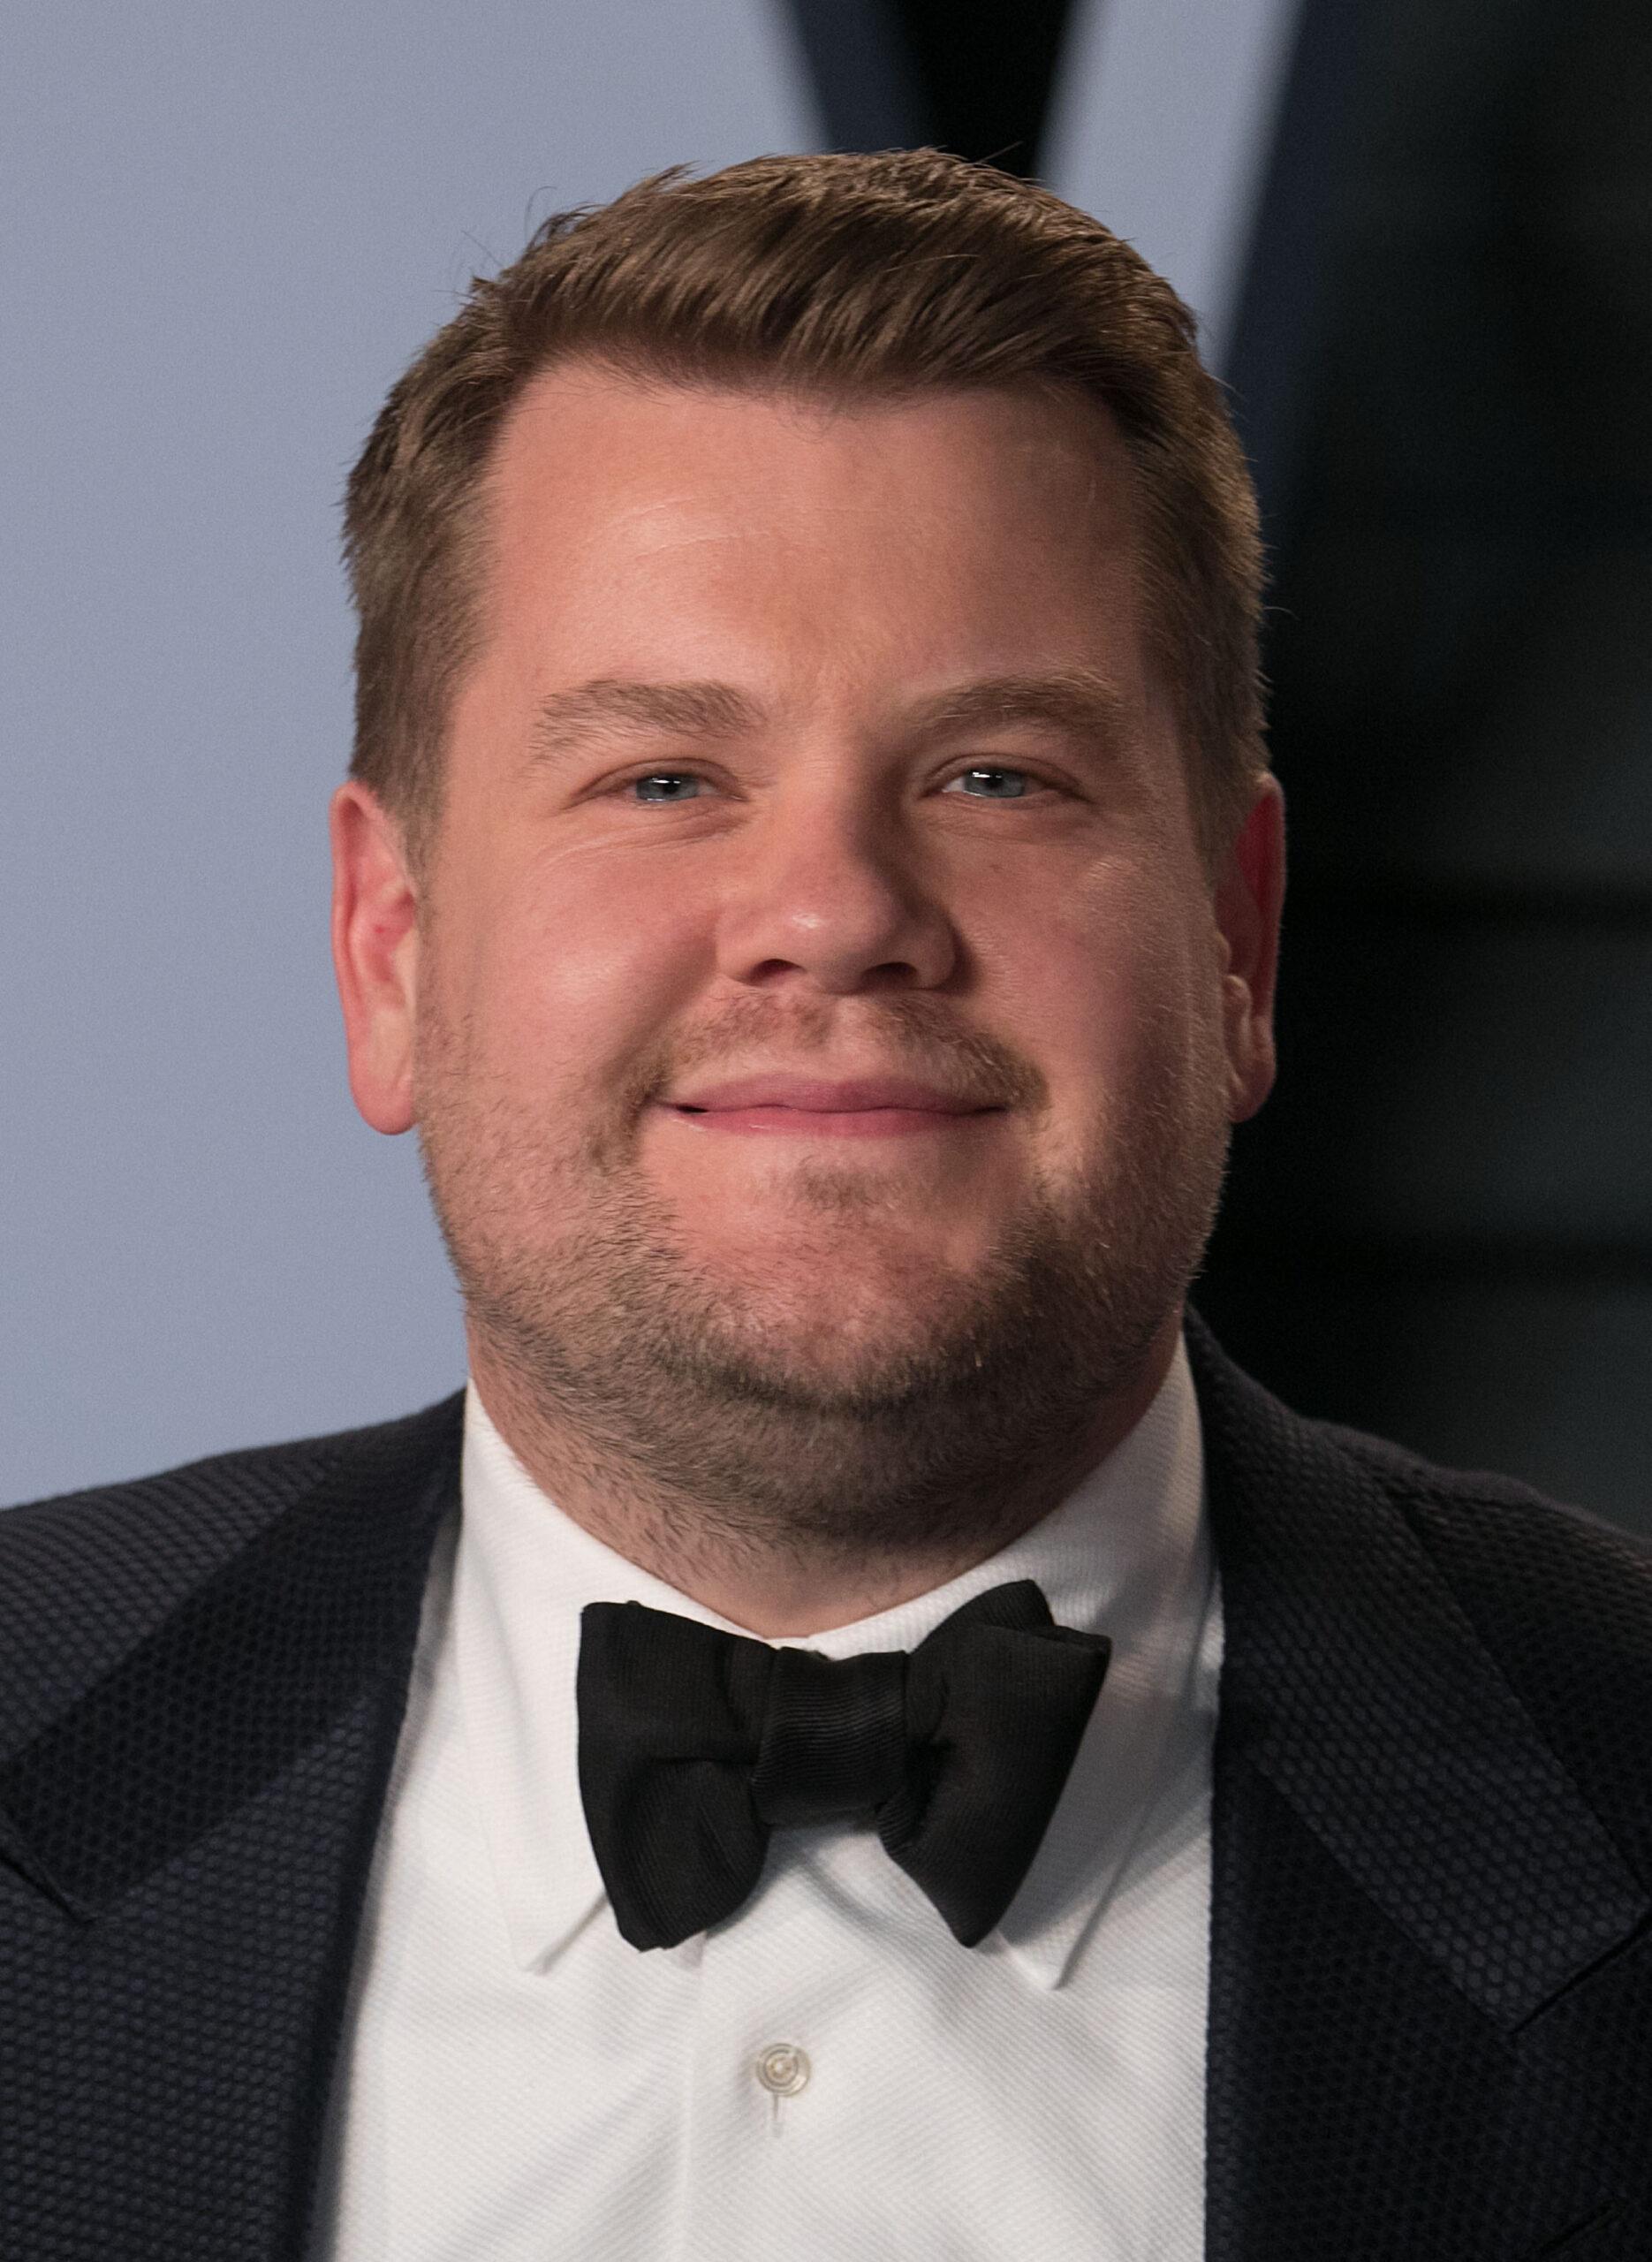 James Corden at the red carpet of the 2019 Creative Arts Emmy Awards on Saturday September 14, 2019 at the Microsoft Theater in Los Angeles, California